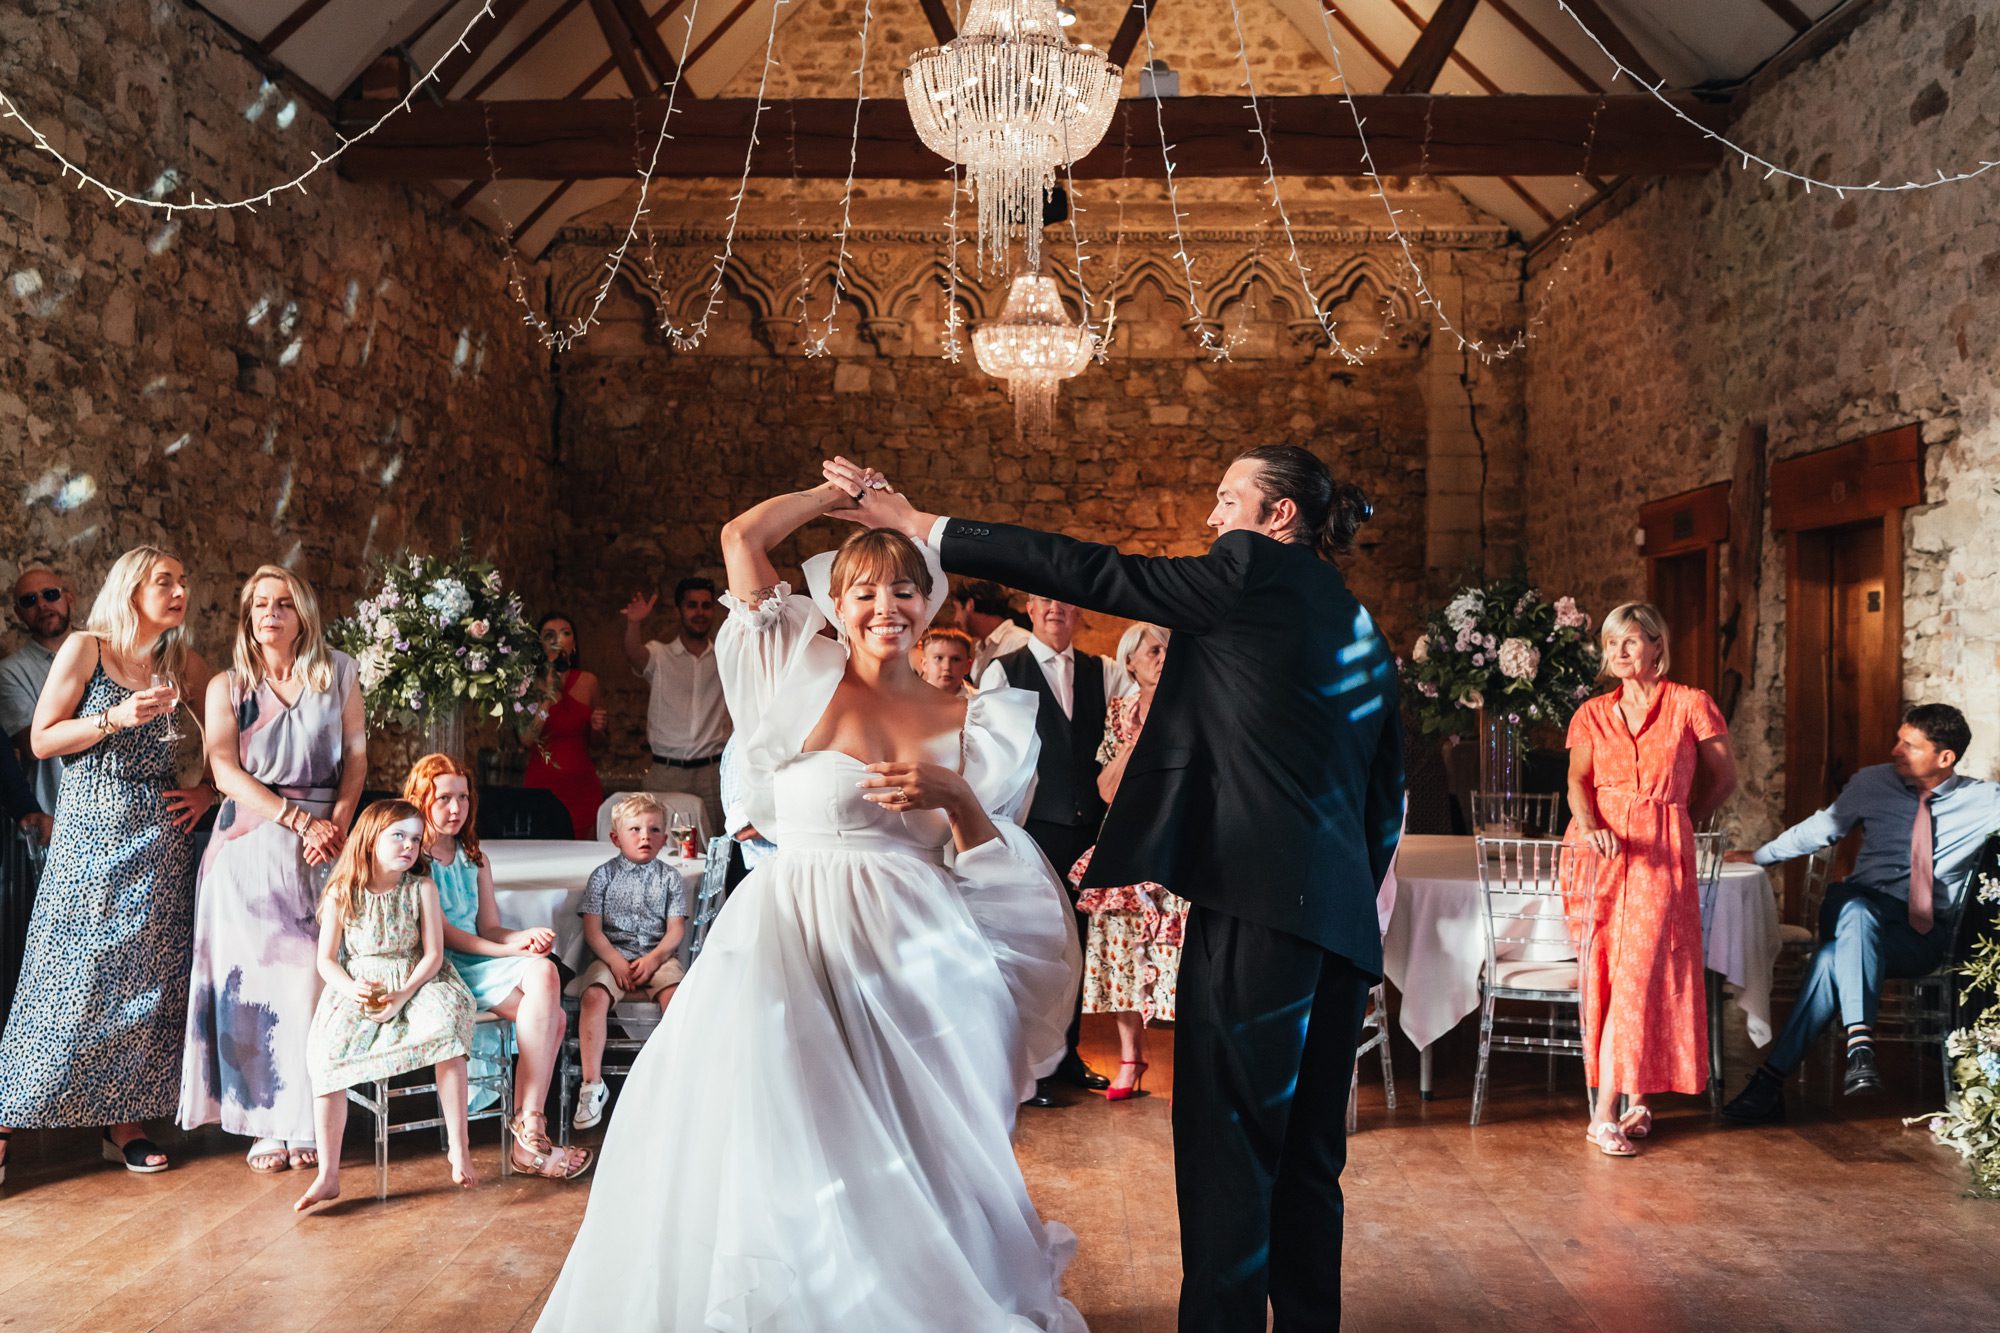 Notley Abbey couples first dance